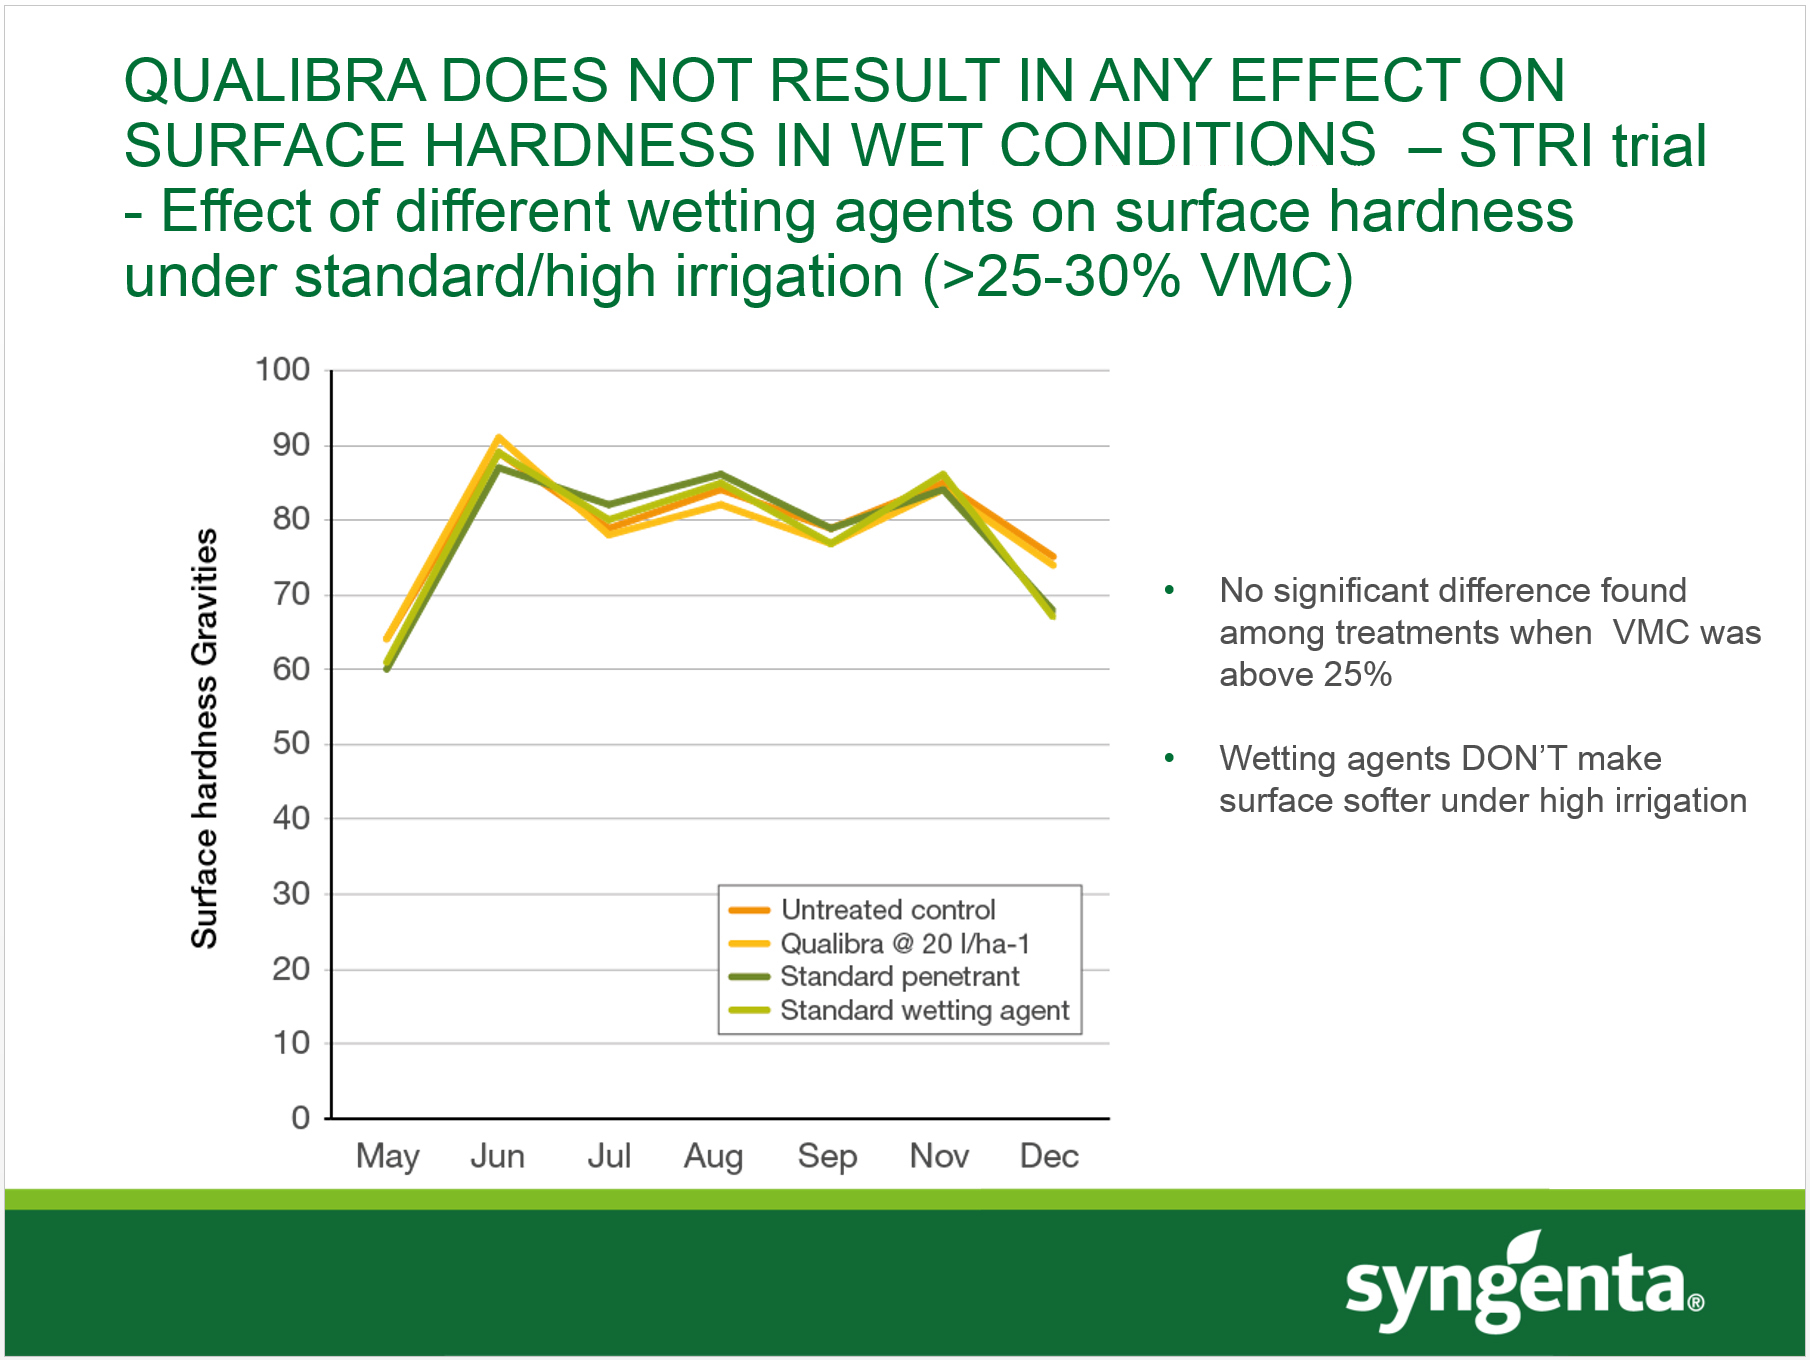 STRI trials result - no effect on surface hardness in wet